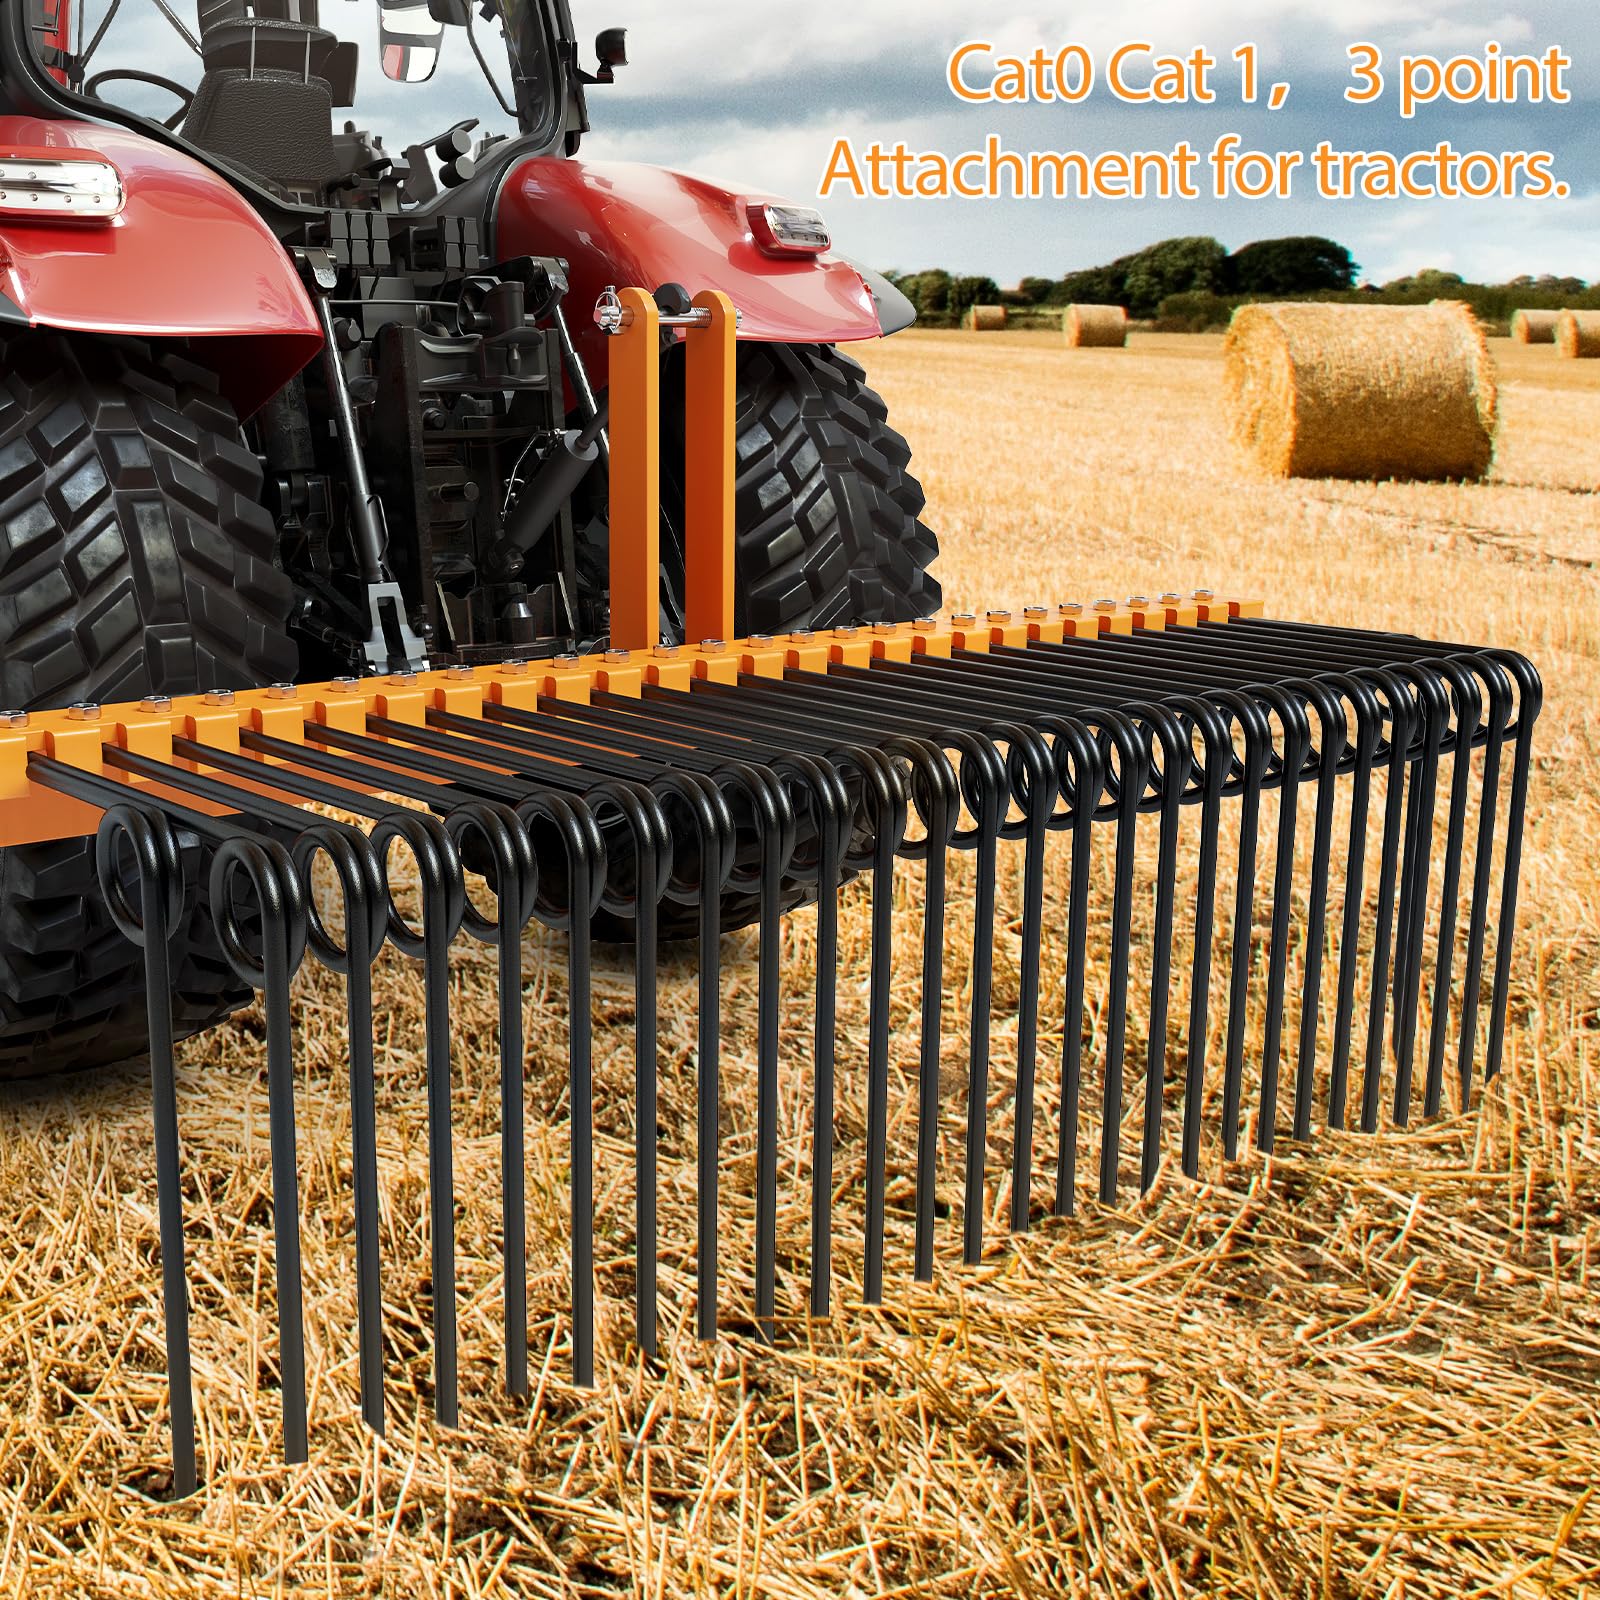 6FT Pine Straw Needle Rake,3 Point Straw Rake,Durable Powder Coated Steel Spring Landscape Rake Fit for Cat0,Cat1,Cat3 Tractors